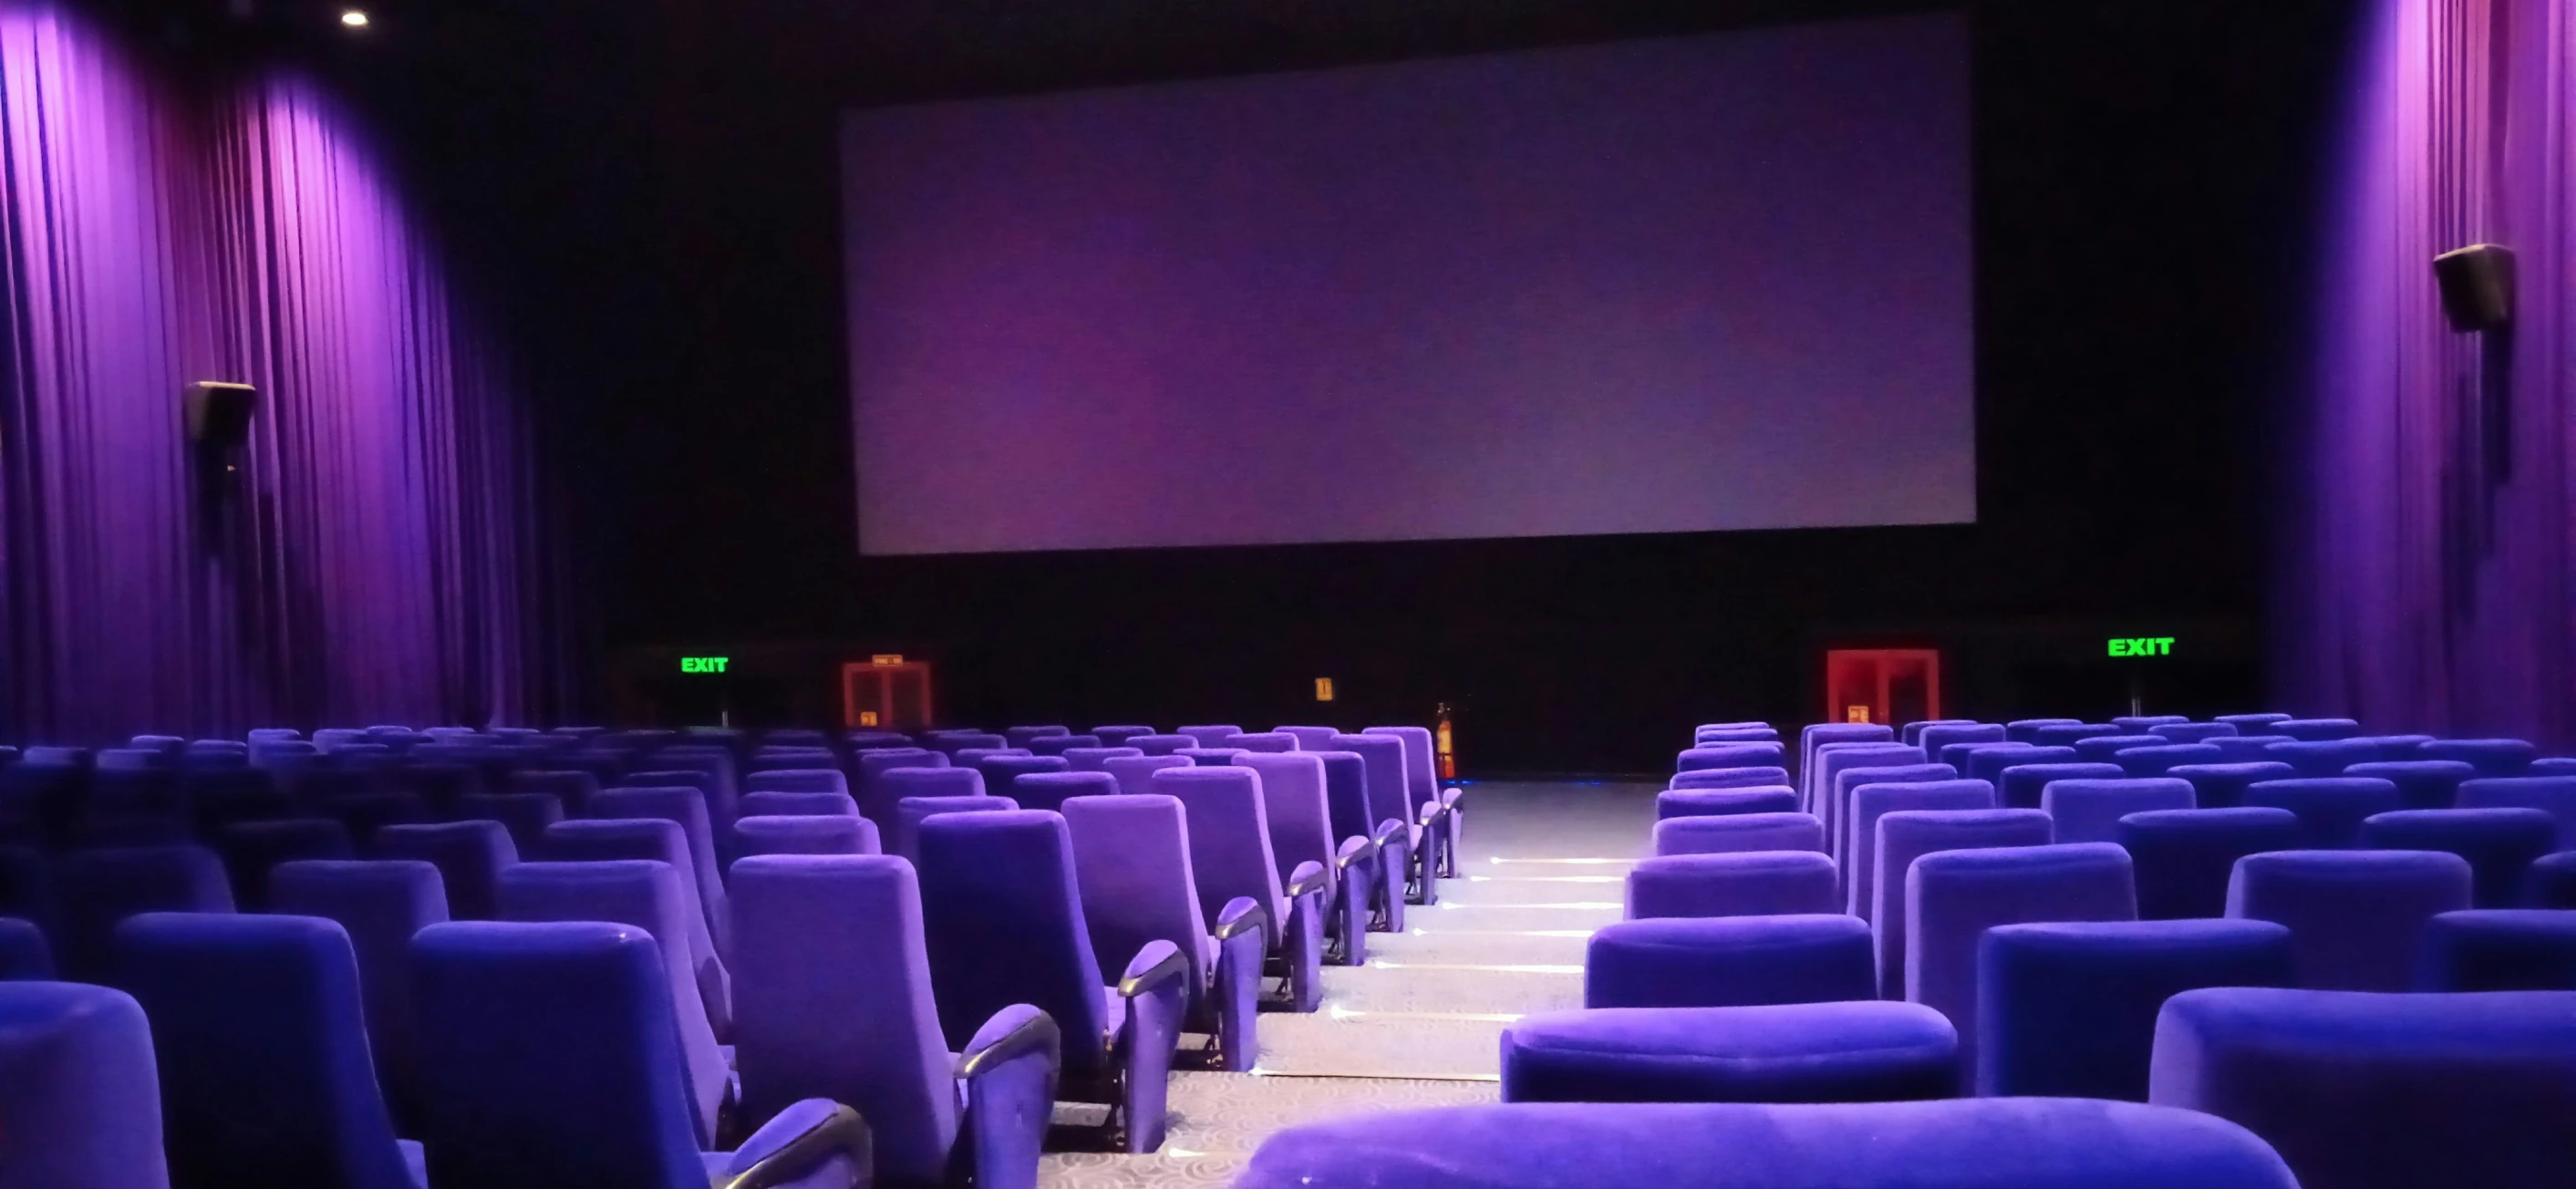 a row of blue seats with a large screen